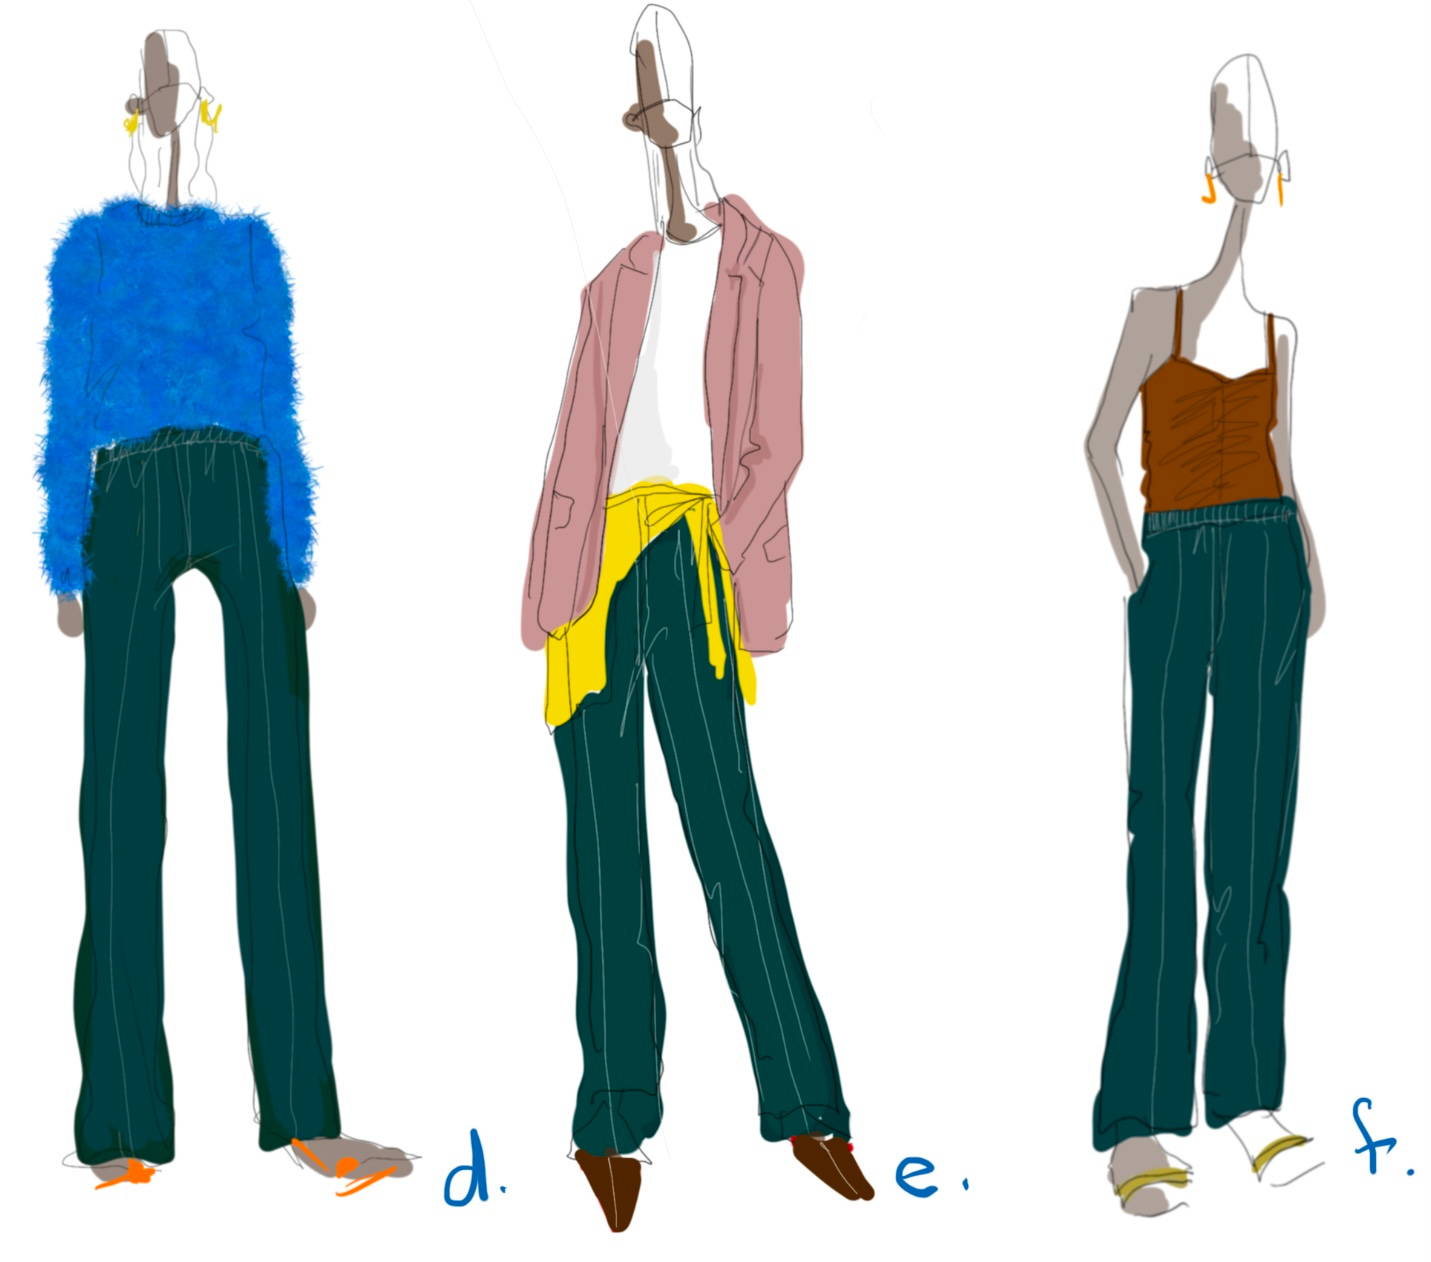 Three illustrated models wearing clothes